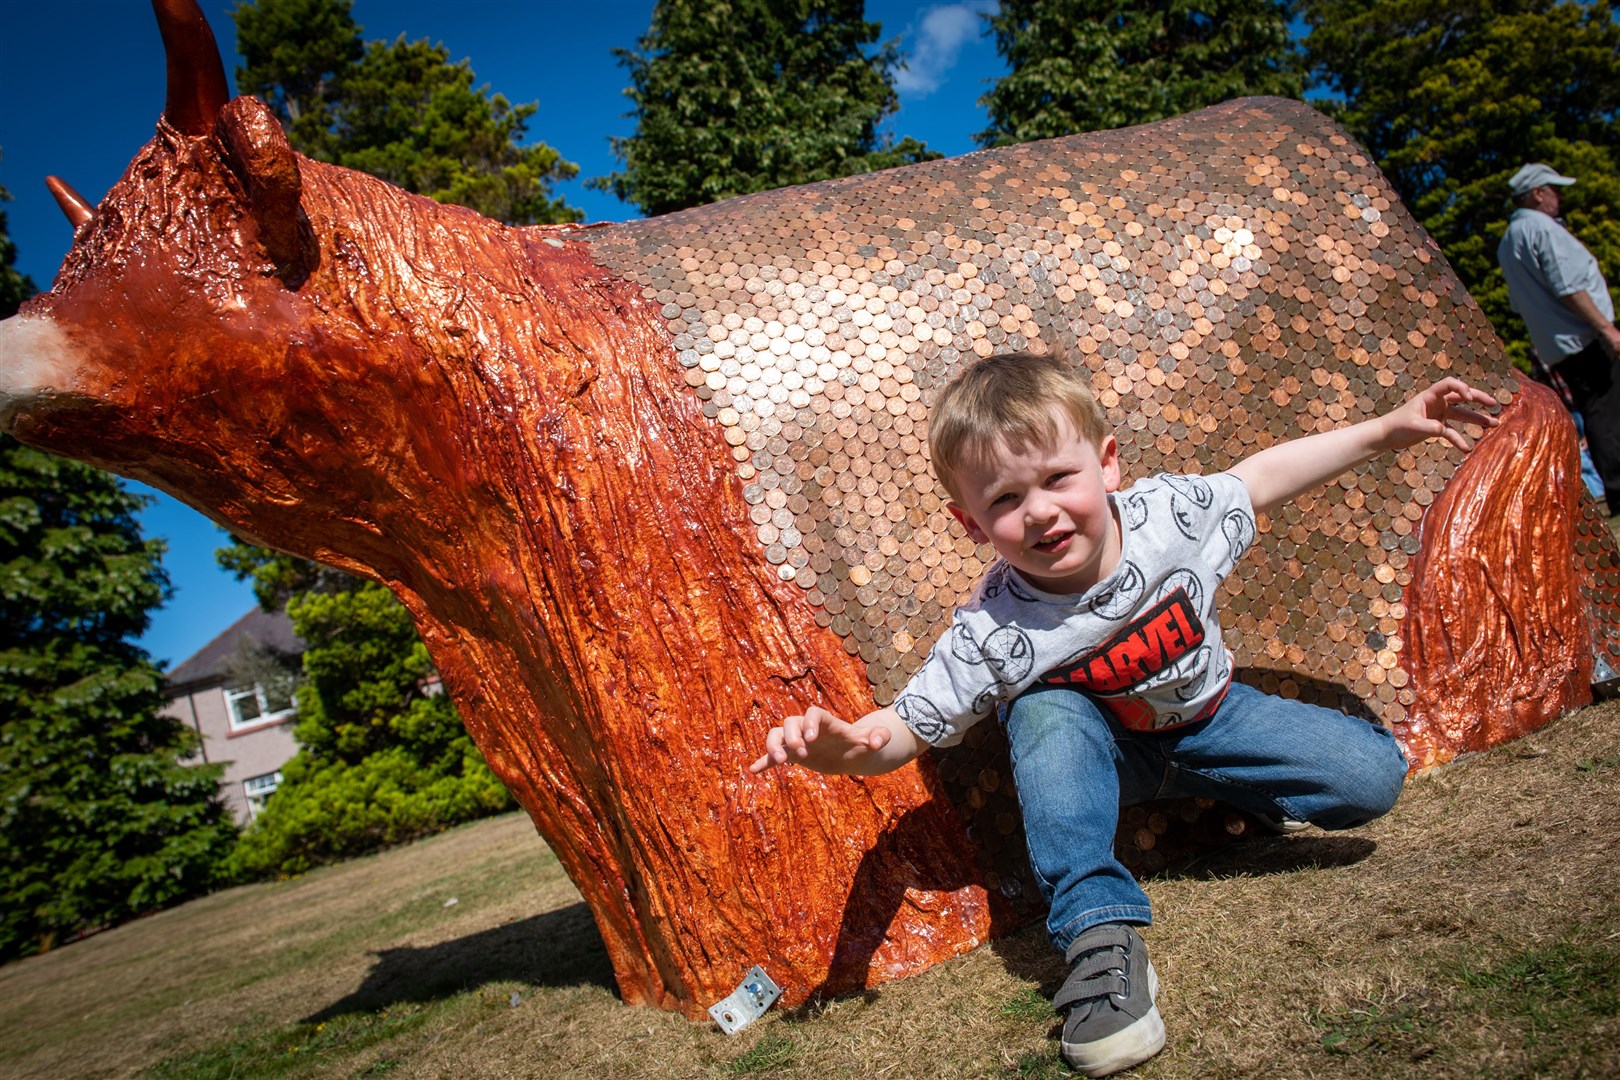 Ruaridh Narine with Cash Cow by Will and Ollie Hayden.